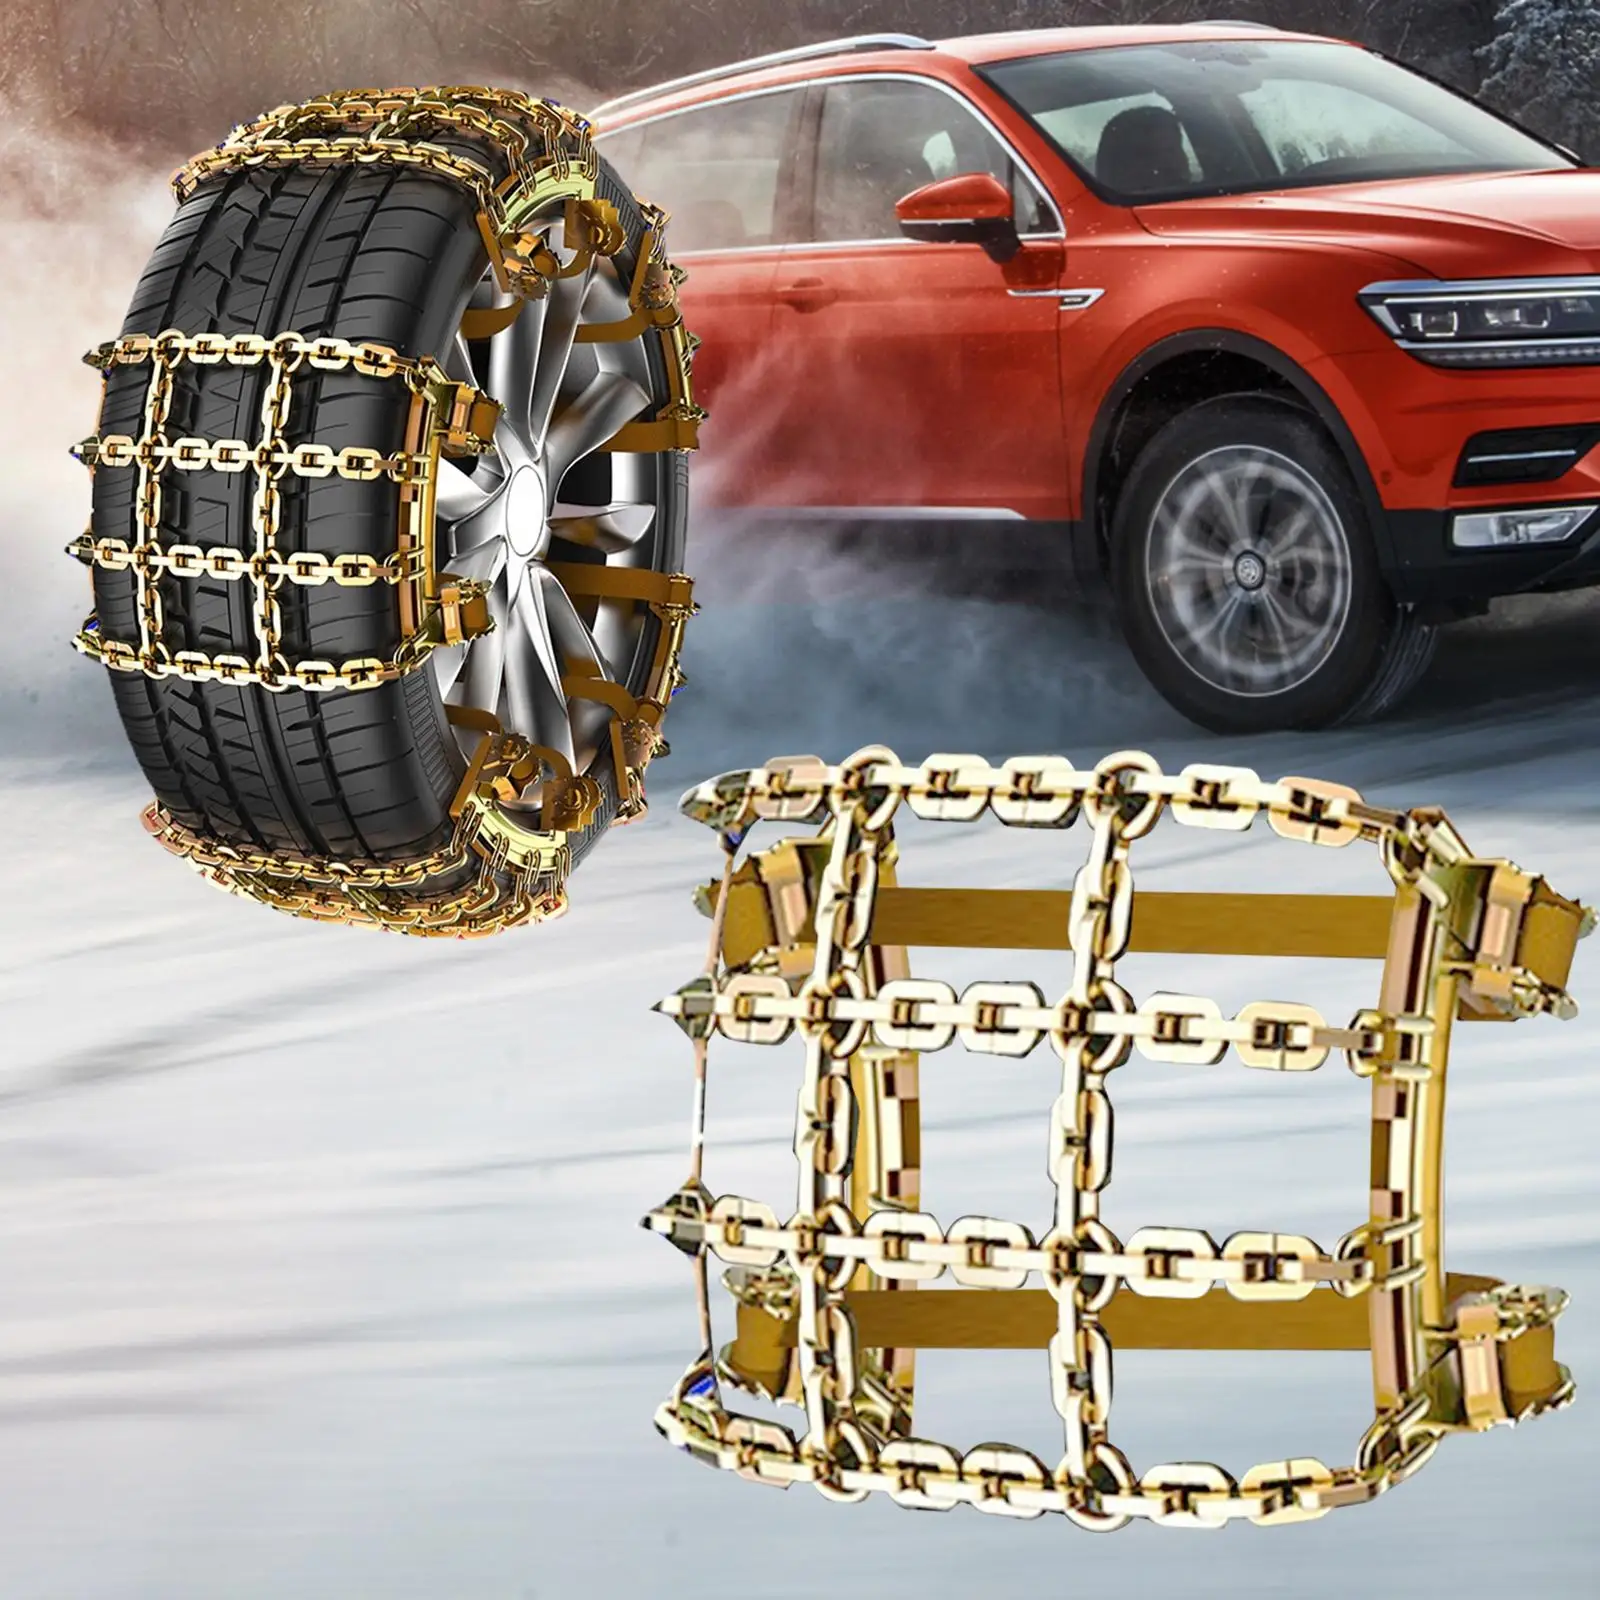 Snow Chain Emergency Car Tire Chain Snow and Ice for Suvs Pickups Cars